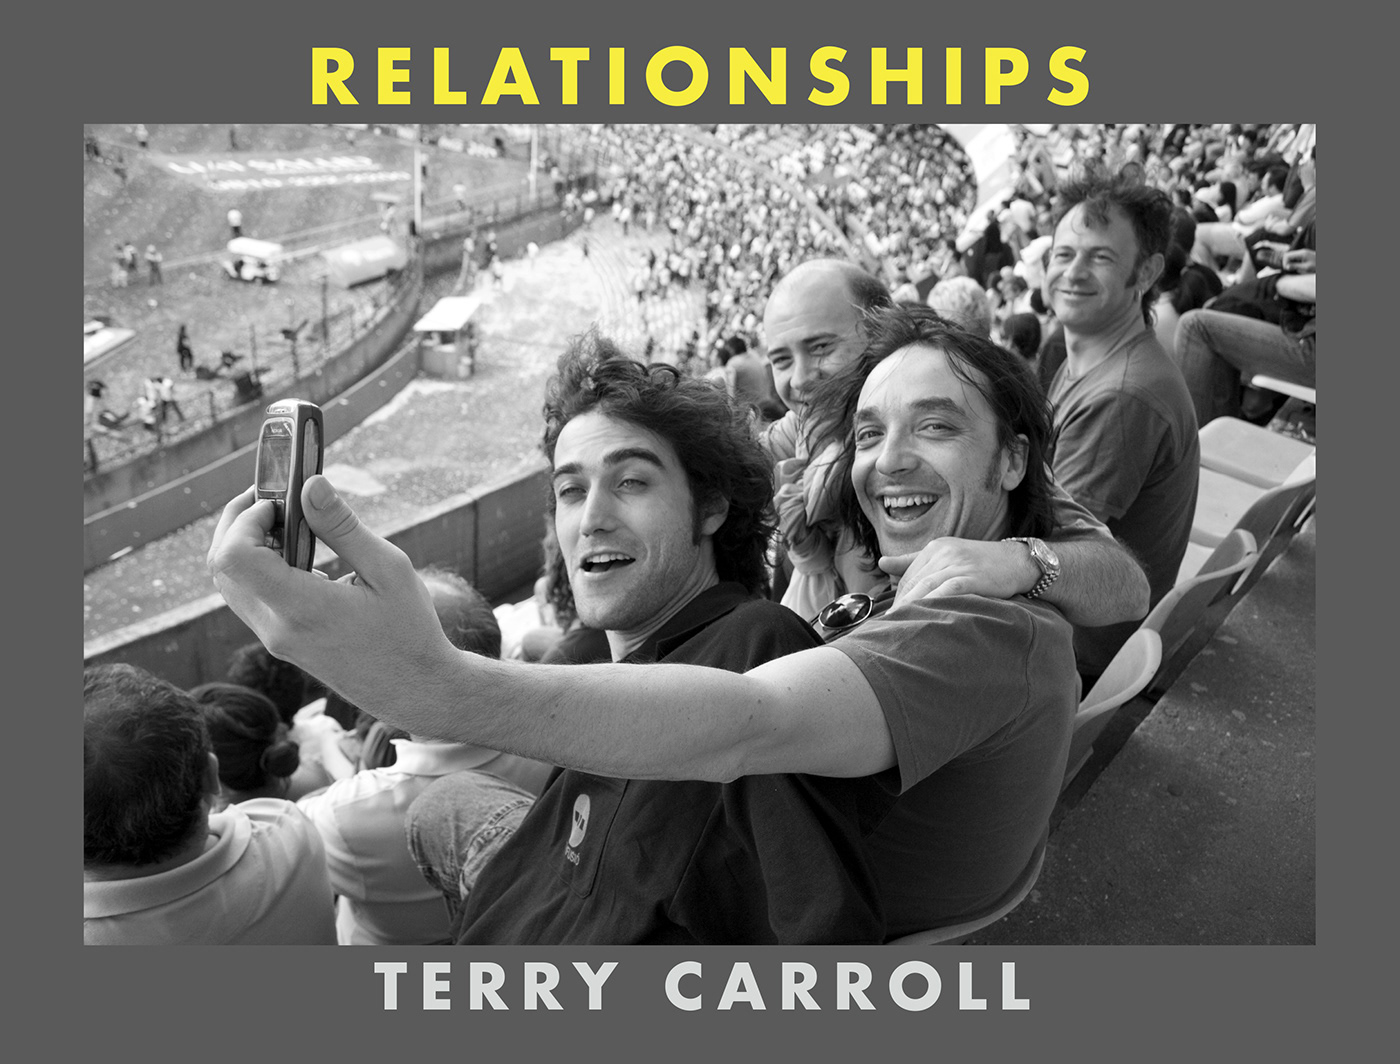 "Relationships" by Terry Carroll (Oakland House Press, 2008), a black-and-white book of engagement